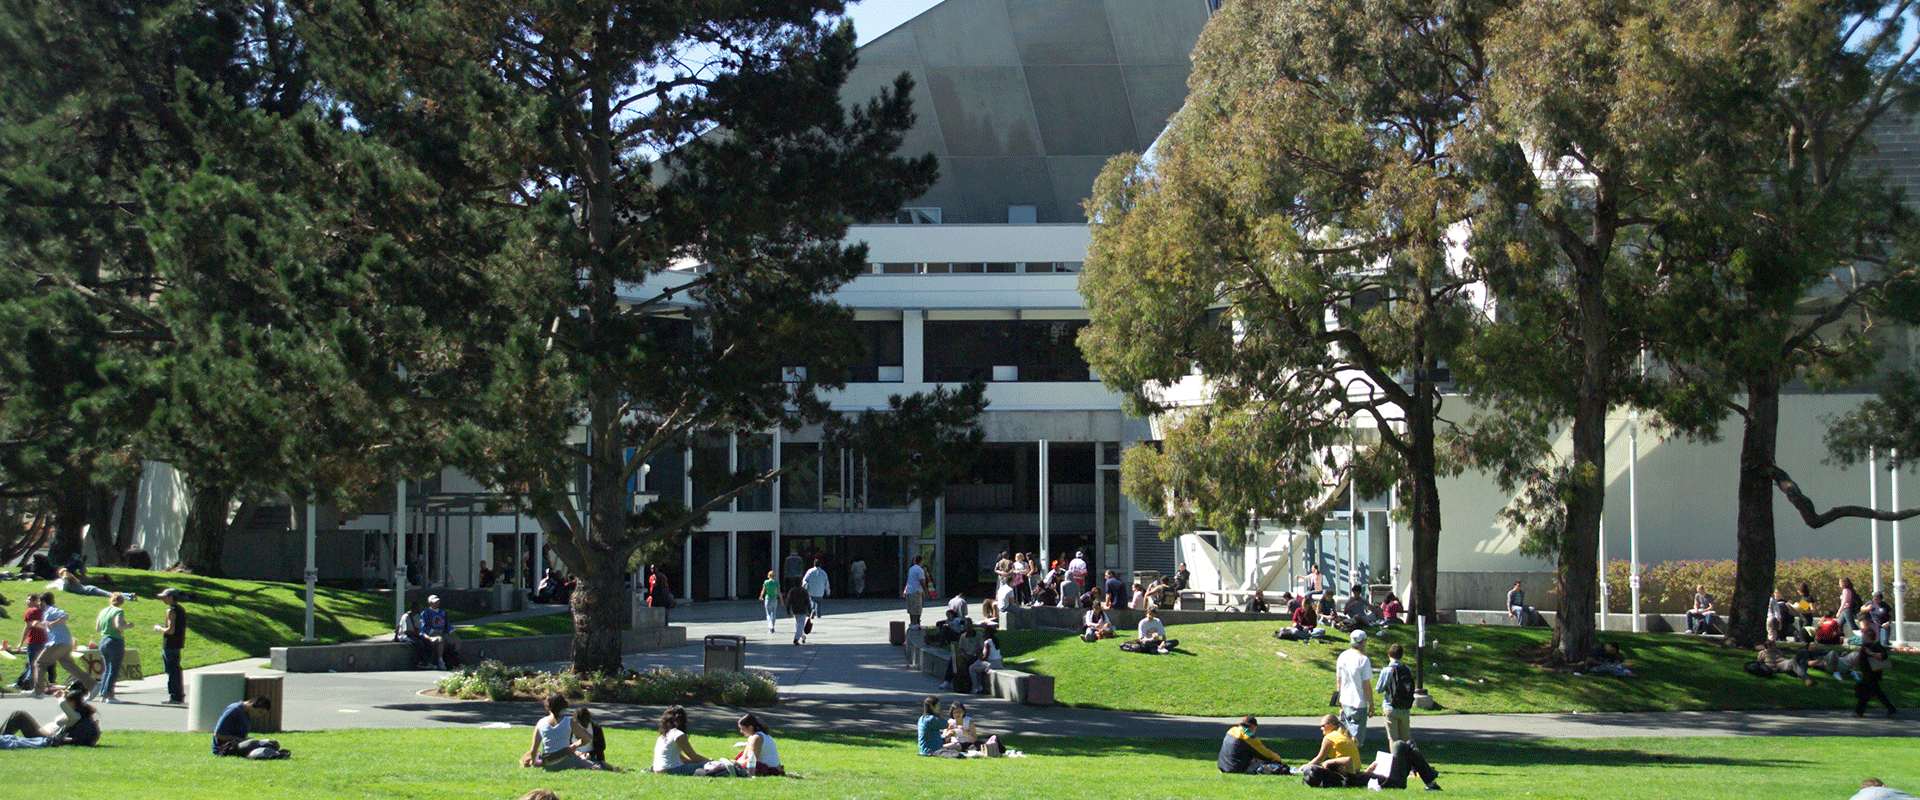 SF State campus lawn and student center